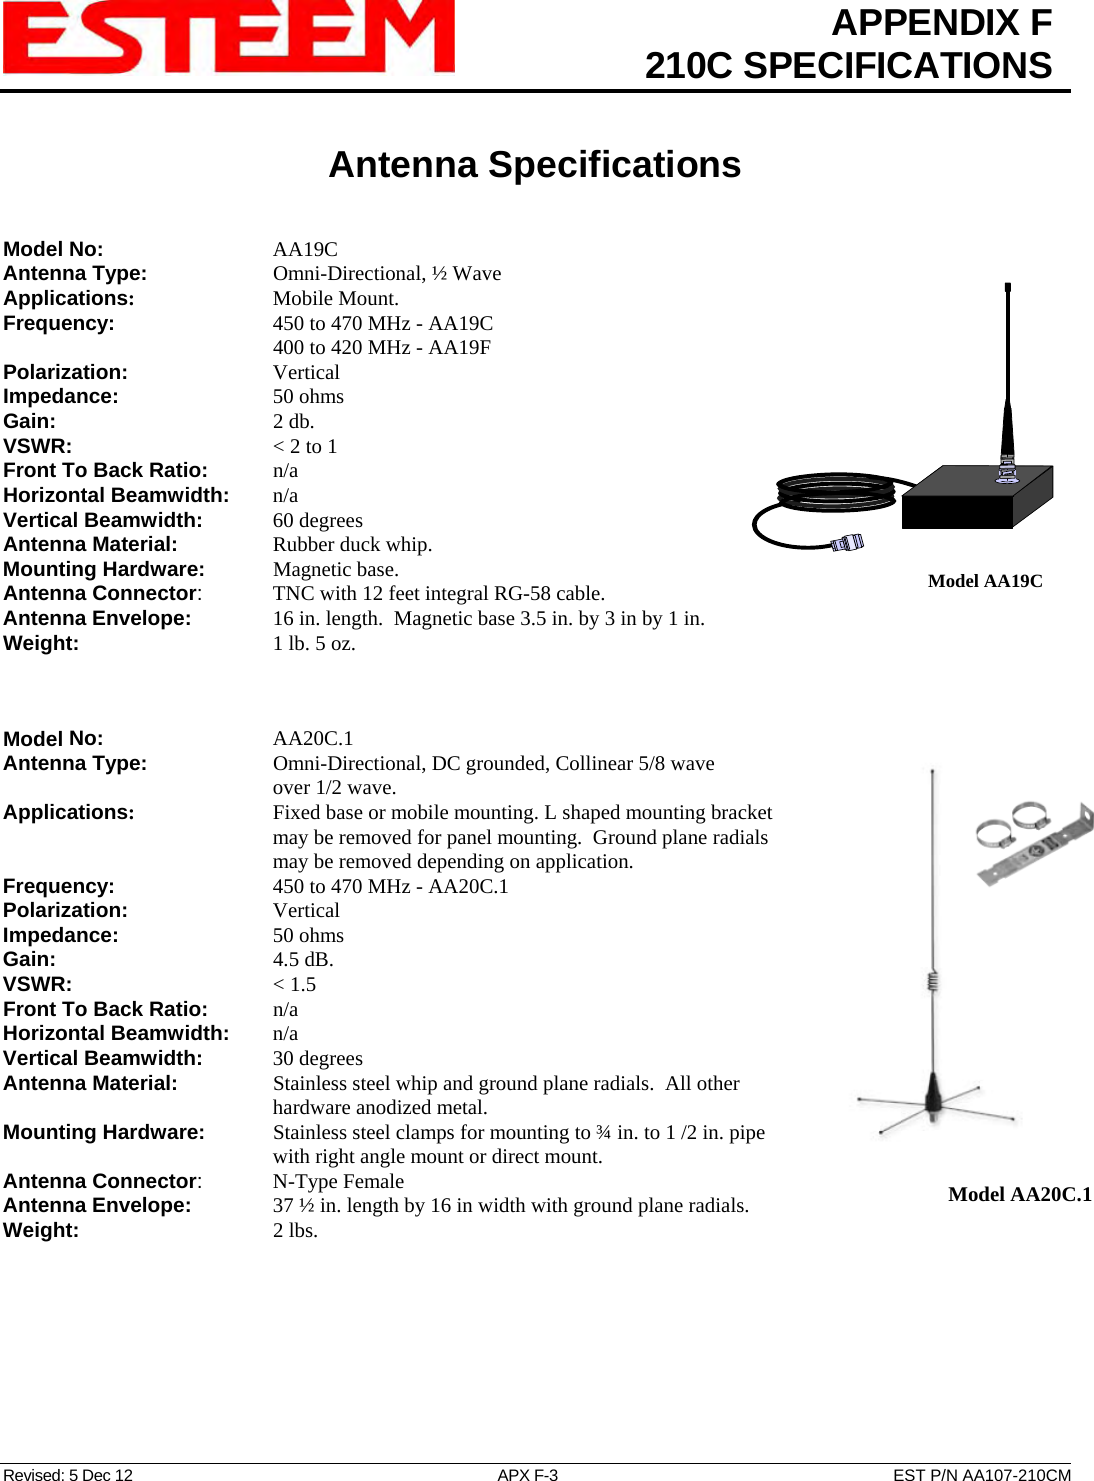  APPENDIX F  210C SPECIFICATIONS   Antenna Specifications   Revised: 5 Dec 12  APX F-3  EST P/N AA107-210CM Model No:    AA19C Antenna Type:   Omni-Directional, ½ Wave  Model AA19CApplications:    Mobile Mount. Frequency:    450 to 470 MHz - AA19C       400 to 420 MHz - AA19F  Polarization:    Vertical Impedance:    50 ohms Gain:     2 db. VSWR:      &lt; 2 to 1  Front To Back Ratio:   n/a Horizontal Beamwidth:  n/a Vertical Beamwidth:      60 degrees Antenna Material:     Rubber duck whip.  Mounting Hardware:      Magnetic base.  Antenna Connector:    TNC with 12 feet integral RG-58 cable. Antenna Envelope:   16 in. length.  Magnetic base 3.5 in. by 3 in by 1 in. Weight:           1 lb. 5 oz.     Model No:    AA20C.1 Antenna Type:   Omni-Directional, DC grounded, Collinear 5/8 wave over 1/2 wave.    Model AA20C.1   Applications:       Fixed base or mobile mounting. L shaped mounting bracket may be removed for panel mounting.  Ground plane radials may be removed depending on application. Frequency:    450 to 470 MHz - AA20C.1 Polarization:    Vertical Impedance:    50 ohms Gain:     4.5 dB. VSWR:      &lt; 1.5  Front To Back Ratio:   n/a Horizontal Beamwidth:  n/a Vertical Beamwidth:      30 degrees Antenna Material:     Stainless steel whip and ground plane radials.  All other hardware anodized metal.  Mounting Hardware:      Stainless steel clamps for mounting to ¾ in. to 1 /2 in. pipe with right angle mount or direct mount.  Antenna Connector:   N-Type Female Antenna Envelope:   37 ½ in. length by 16 in width with ground plane radials. Weight:       2 lbs. 